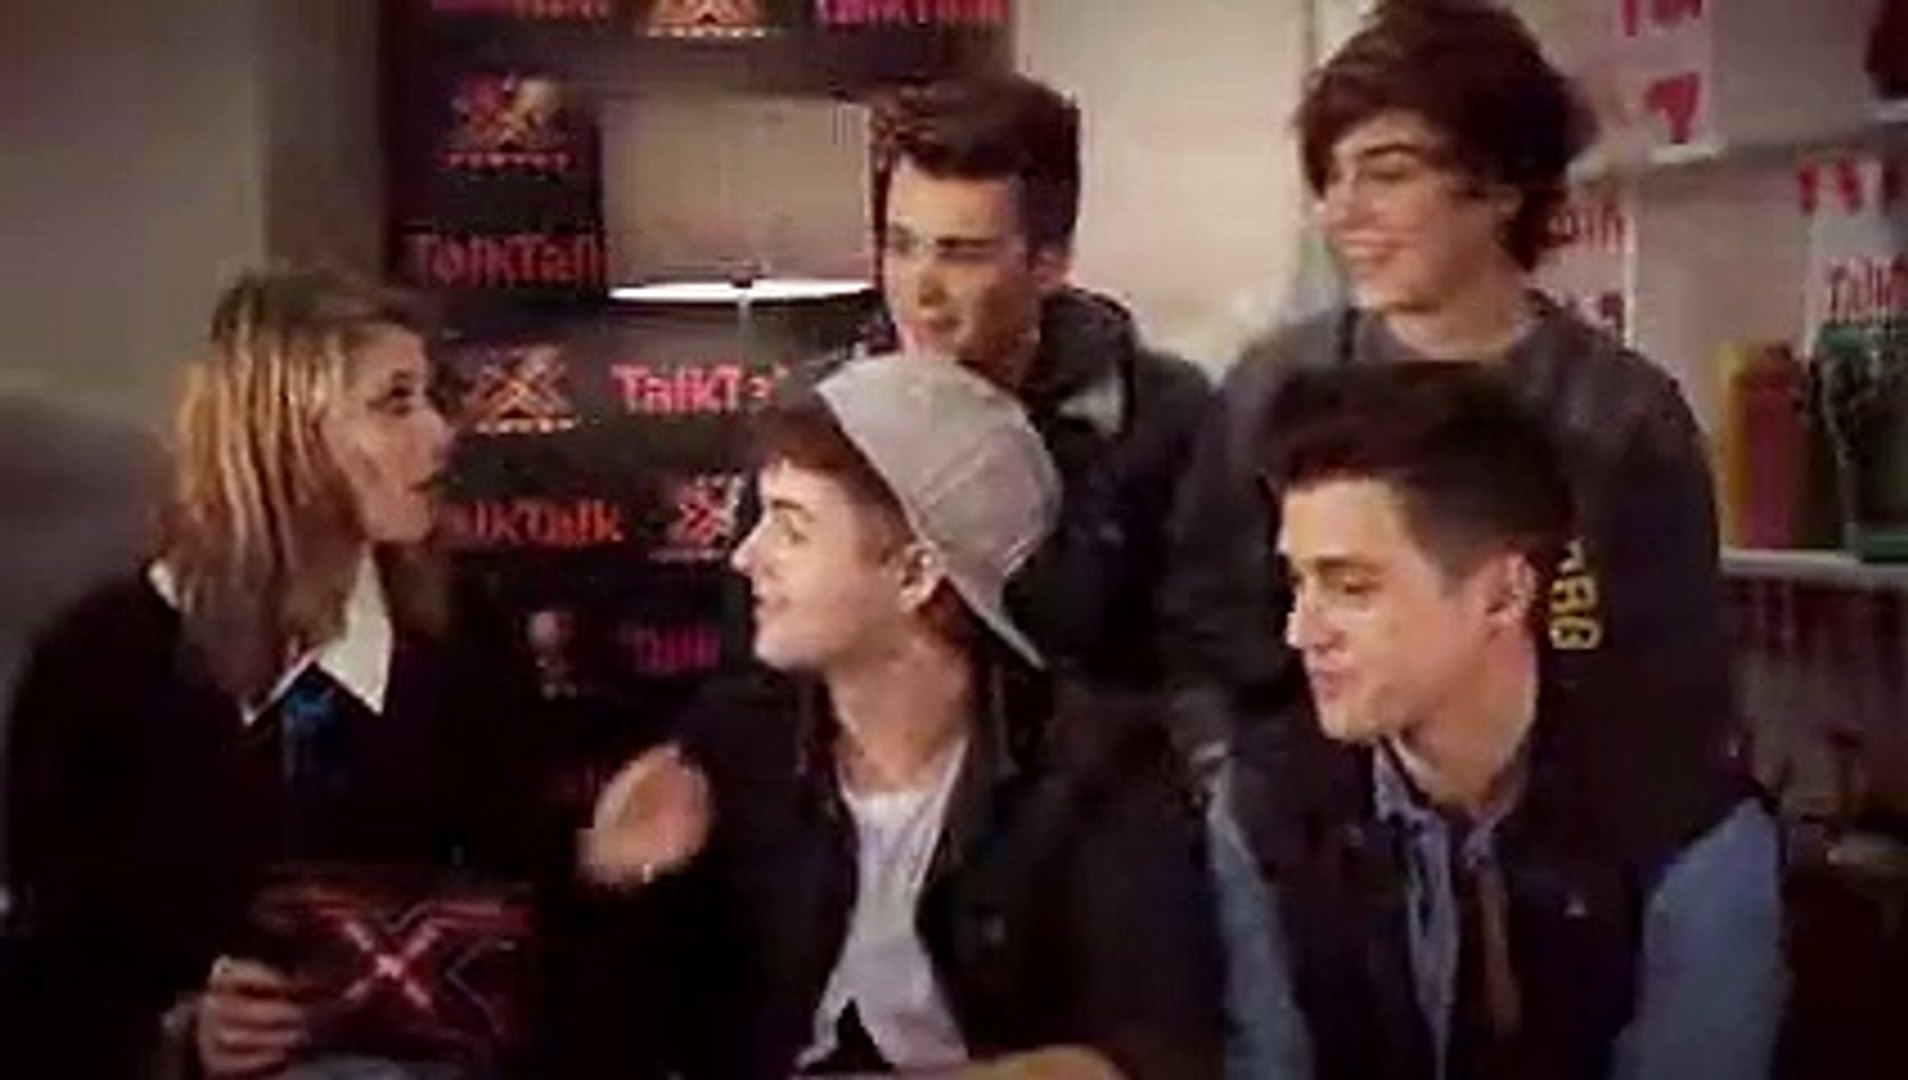 ⁣Pips interview Union J - Backstage with TalkTalk - The X Factor UK 2012 - Official Channel